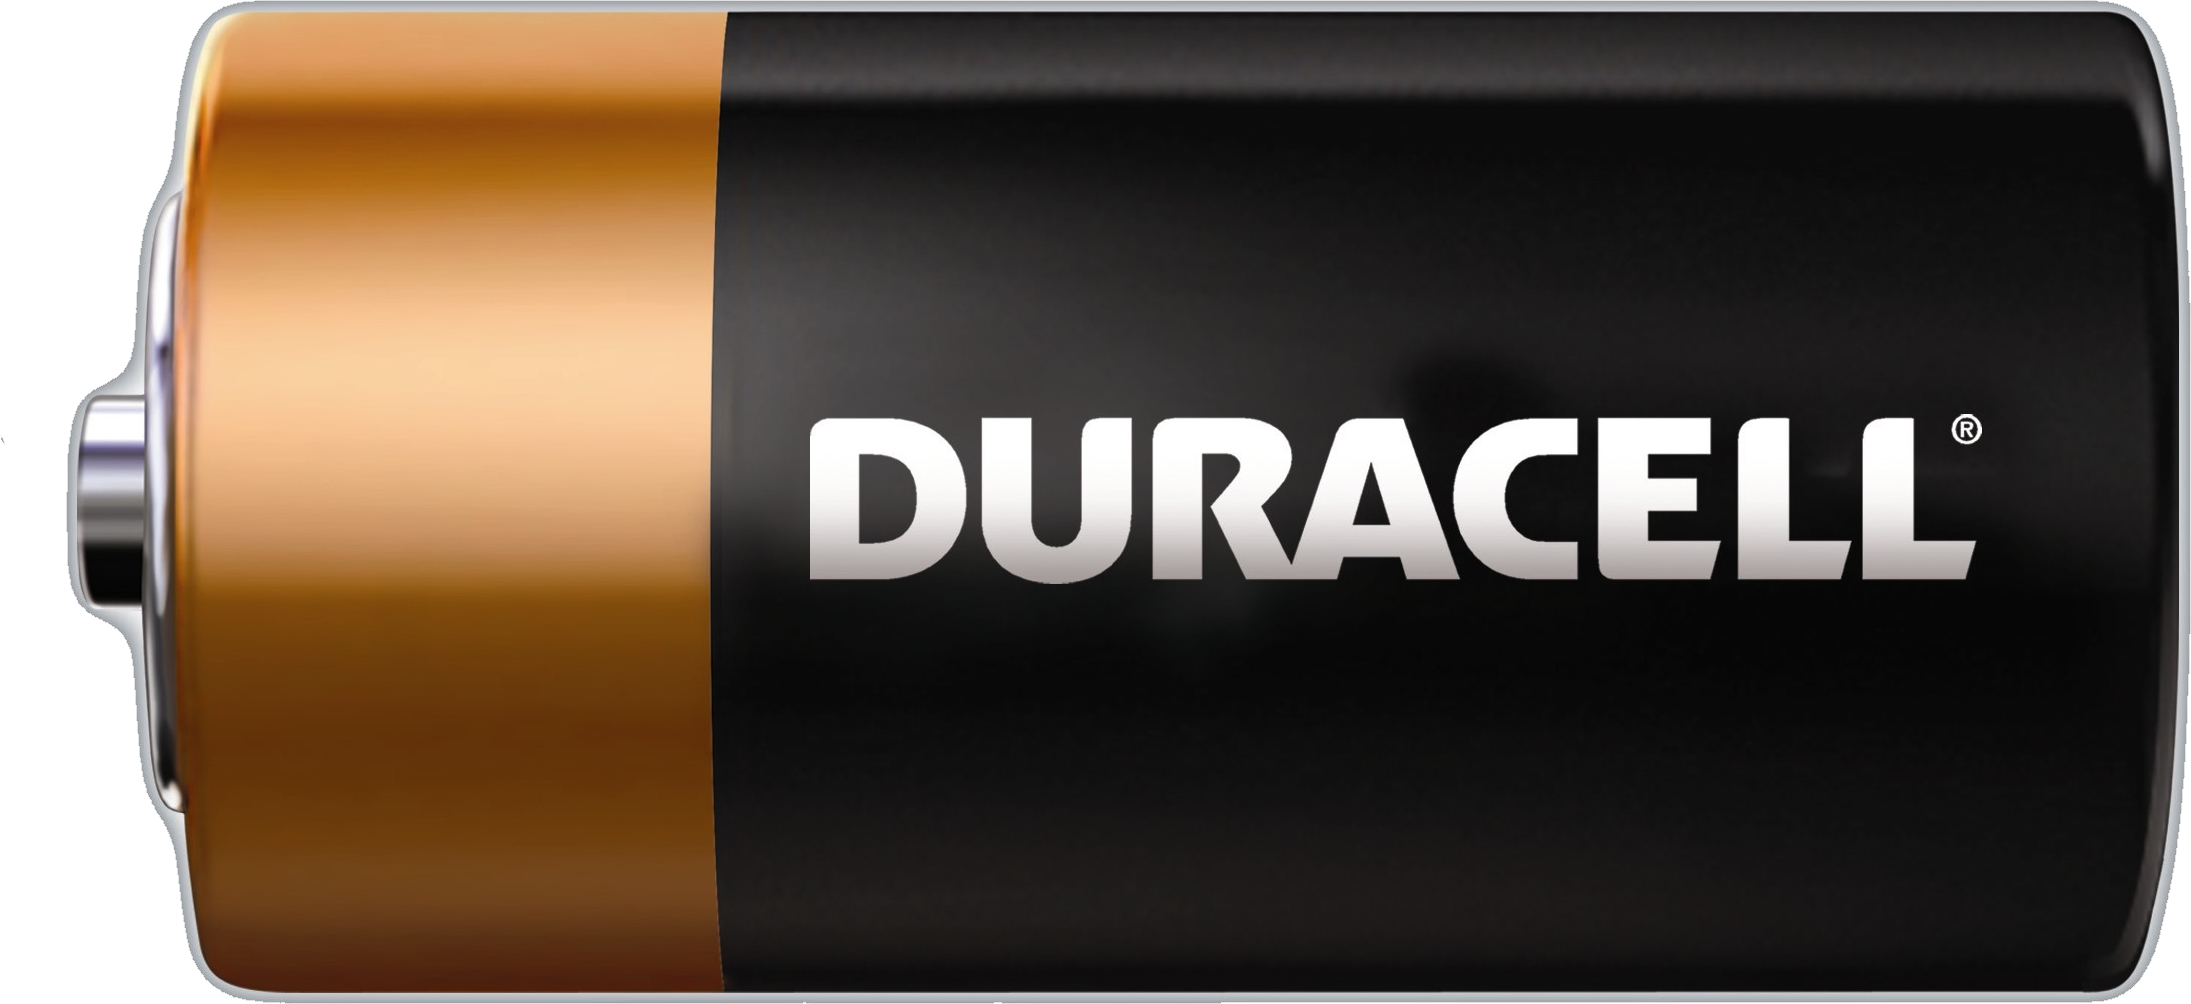 Battery Duracell Png - Duracell, Transparent background PNG HD thumbnail